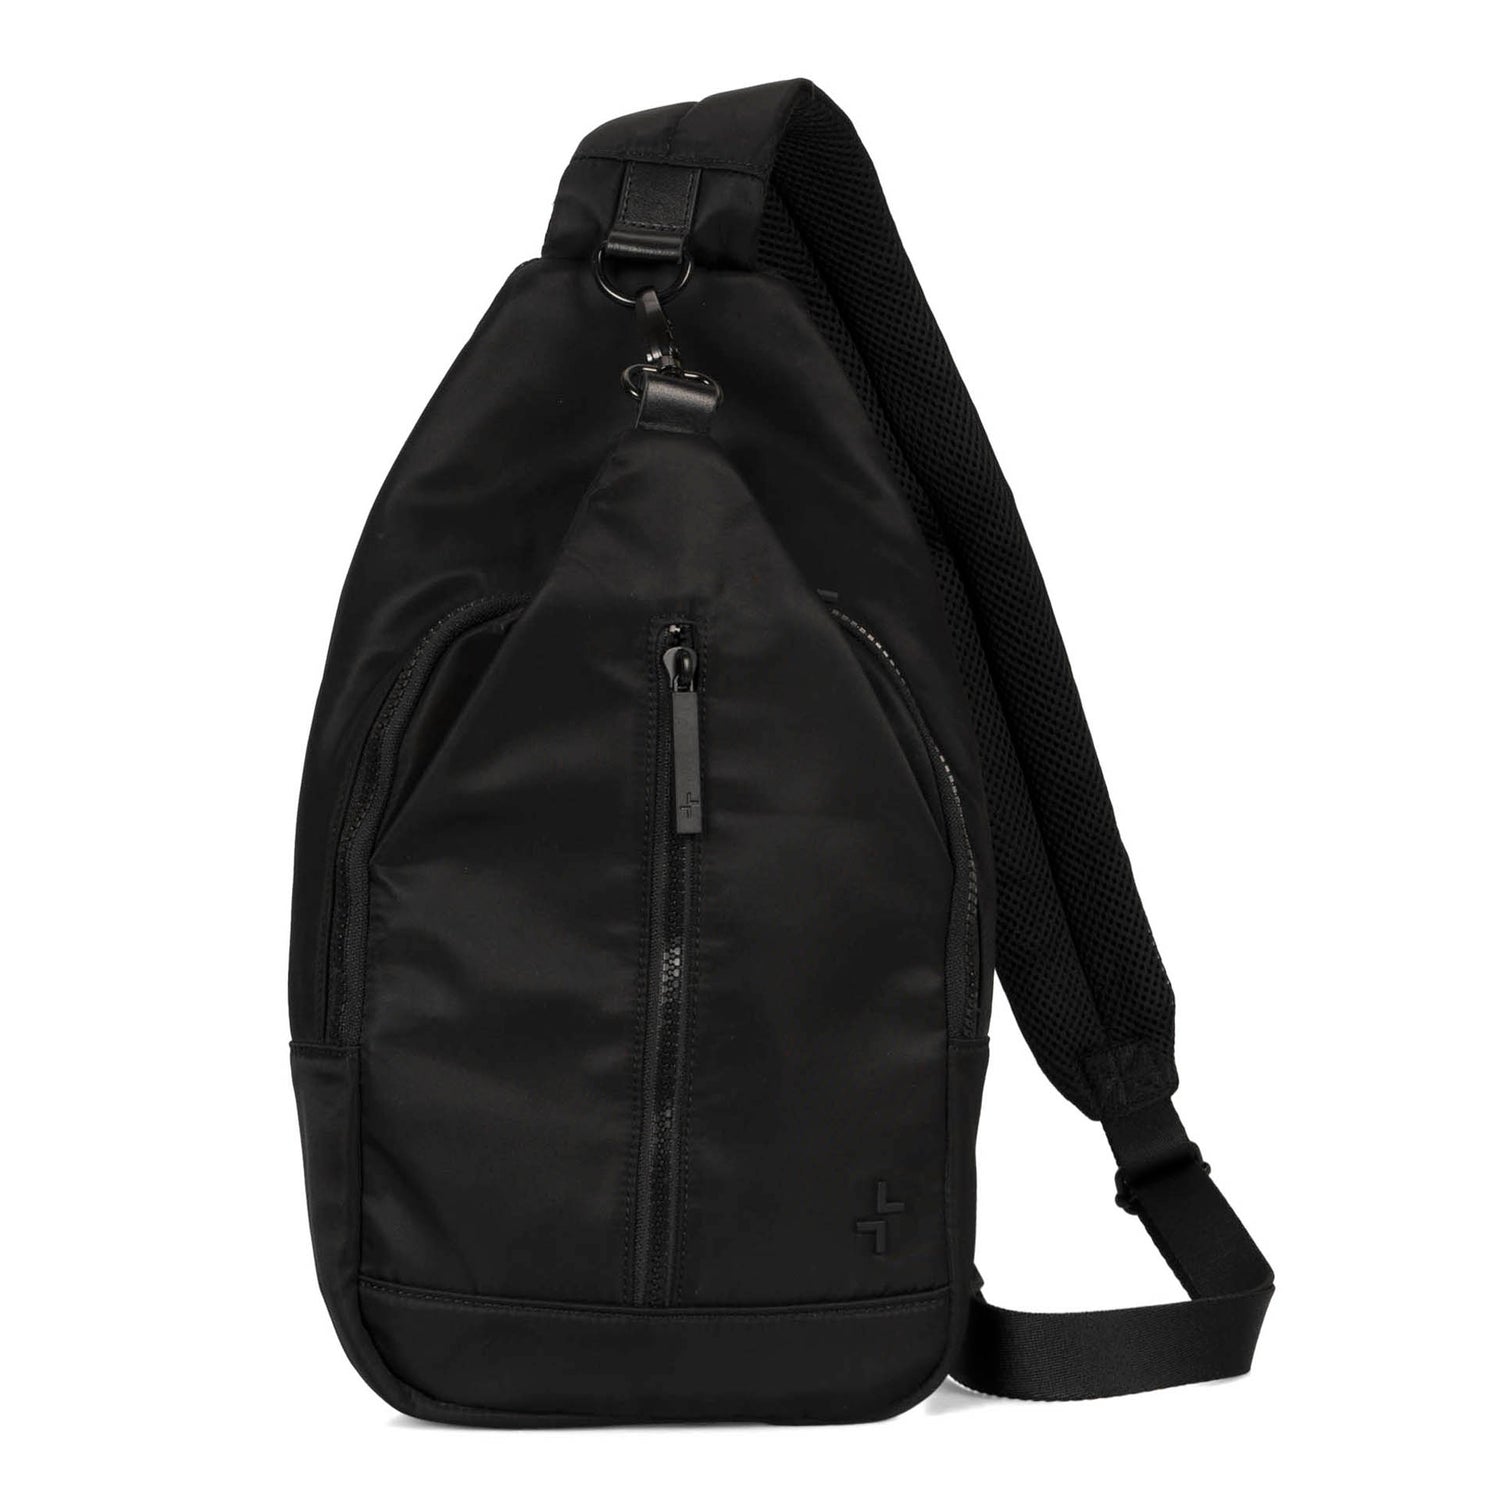 Front side of a black sling bag called suttong designed by Tracker on a white background, showcasing its from zipper pocket and strap.